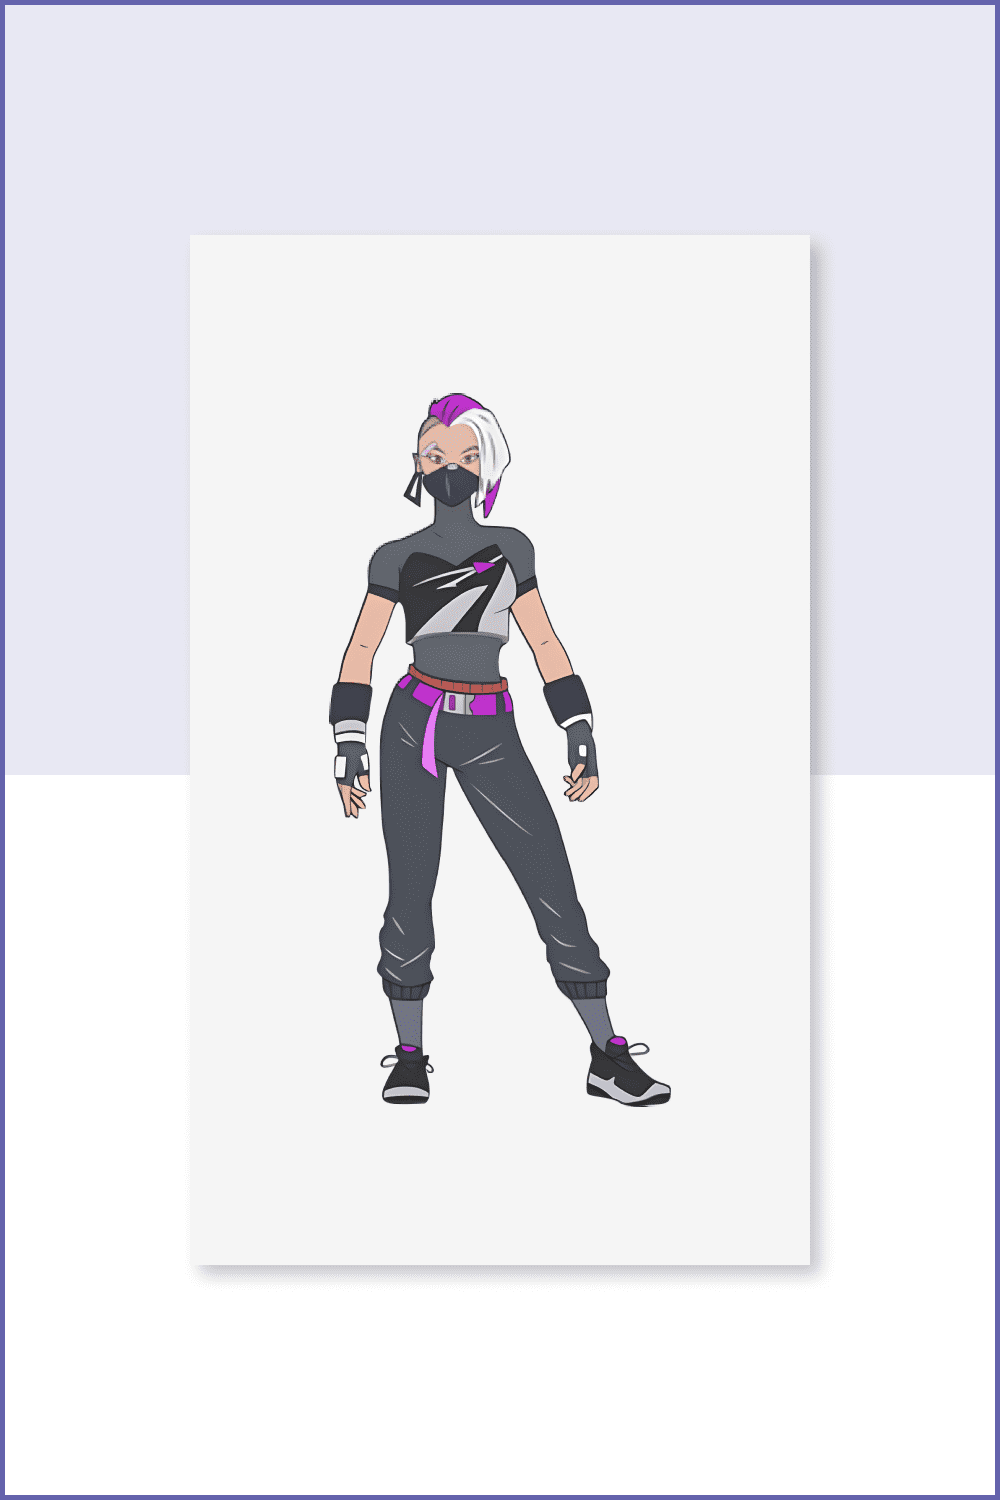 Fortnite heroine in gray with pink accents.